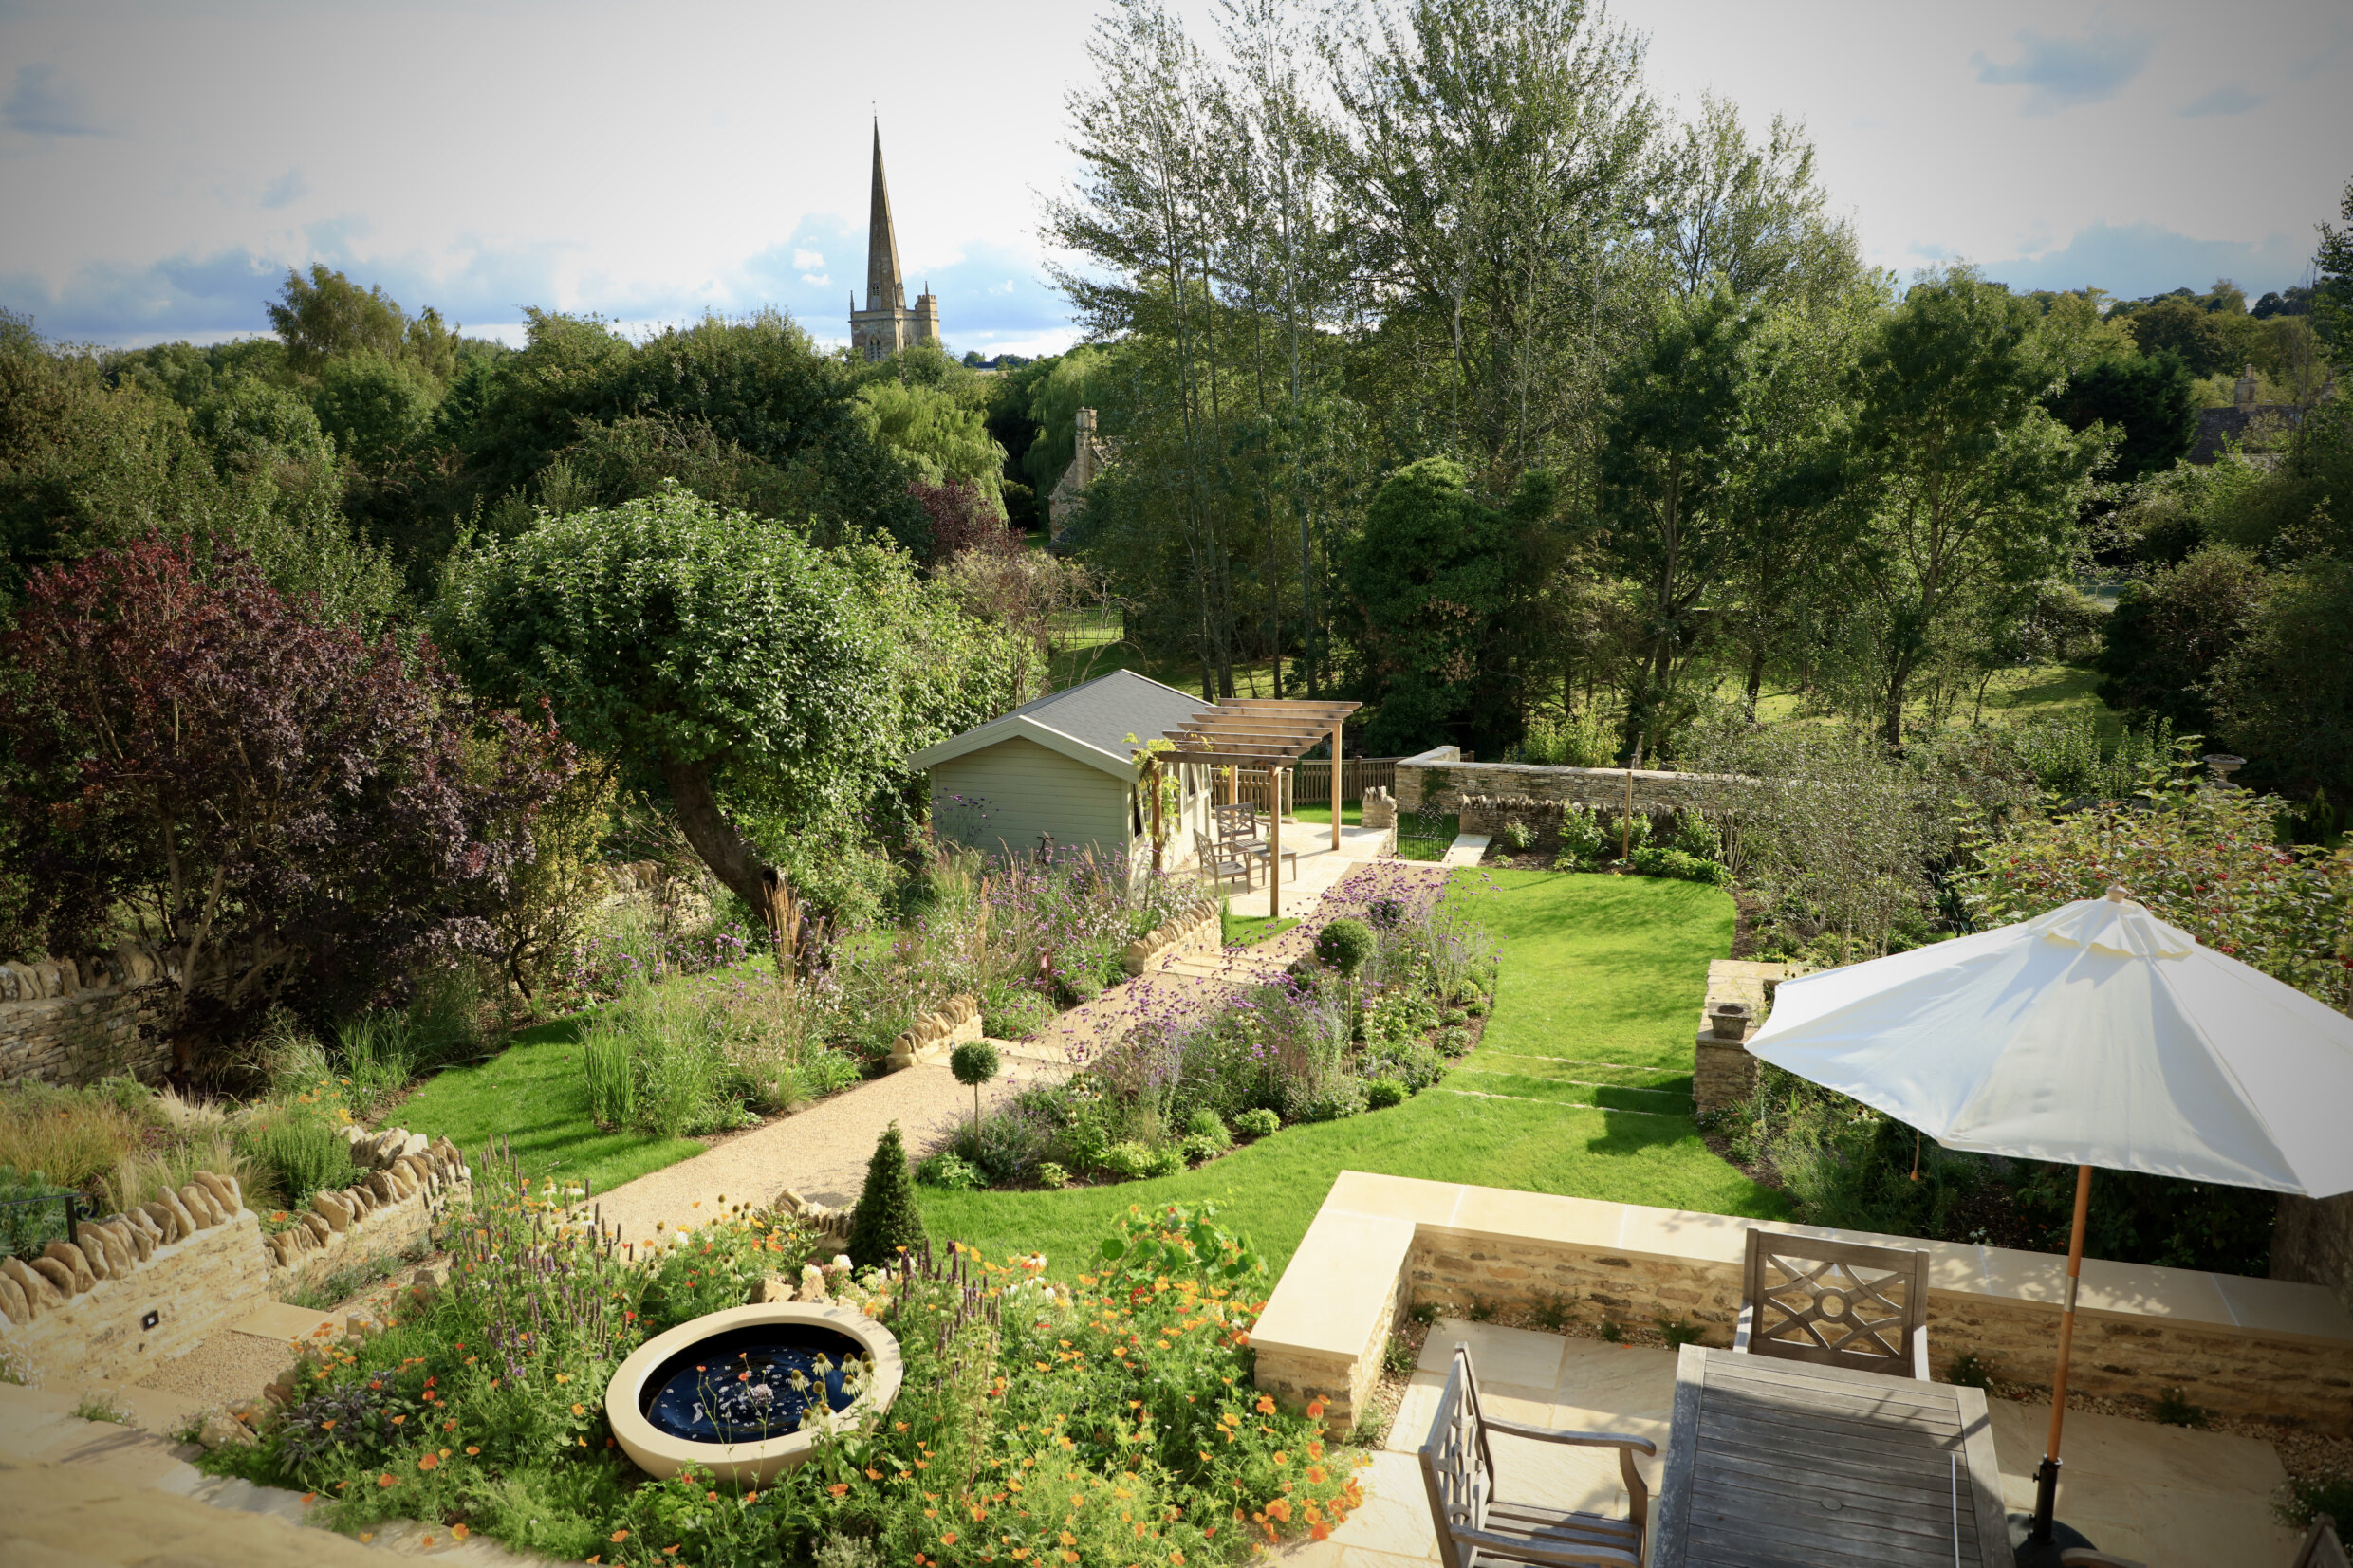 View of the garden from above, of garden furniture, higgin pathways, water feature